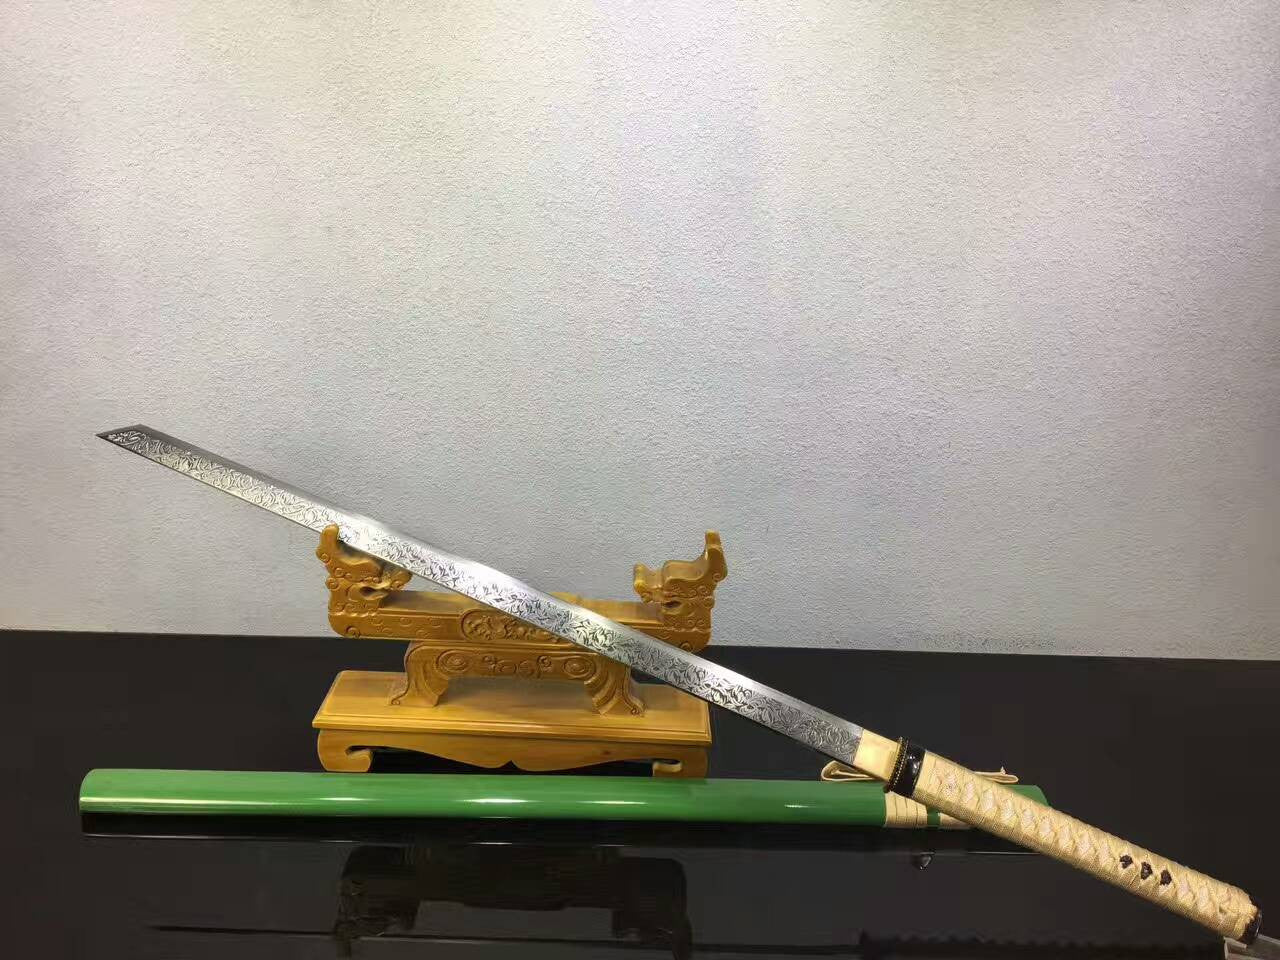 Tang dao(High manganese steel,Green scabbard,Alloy)Full tang,Length 39" - Chinese sword shop